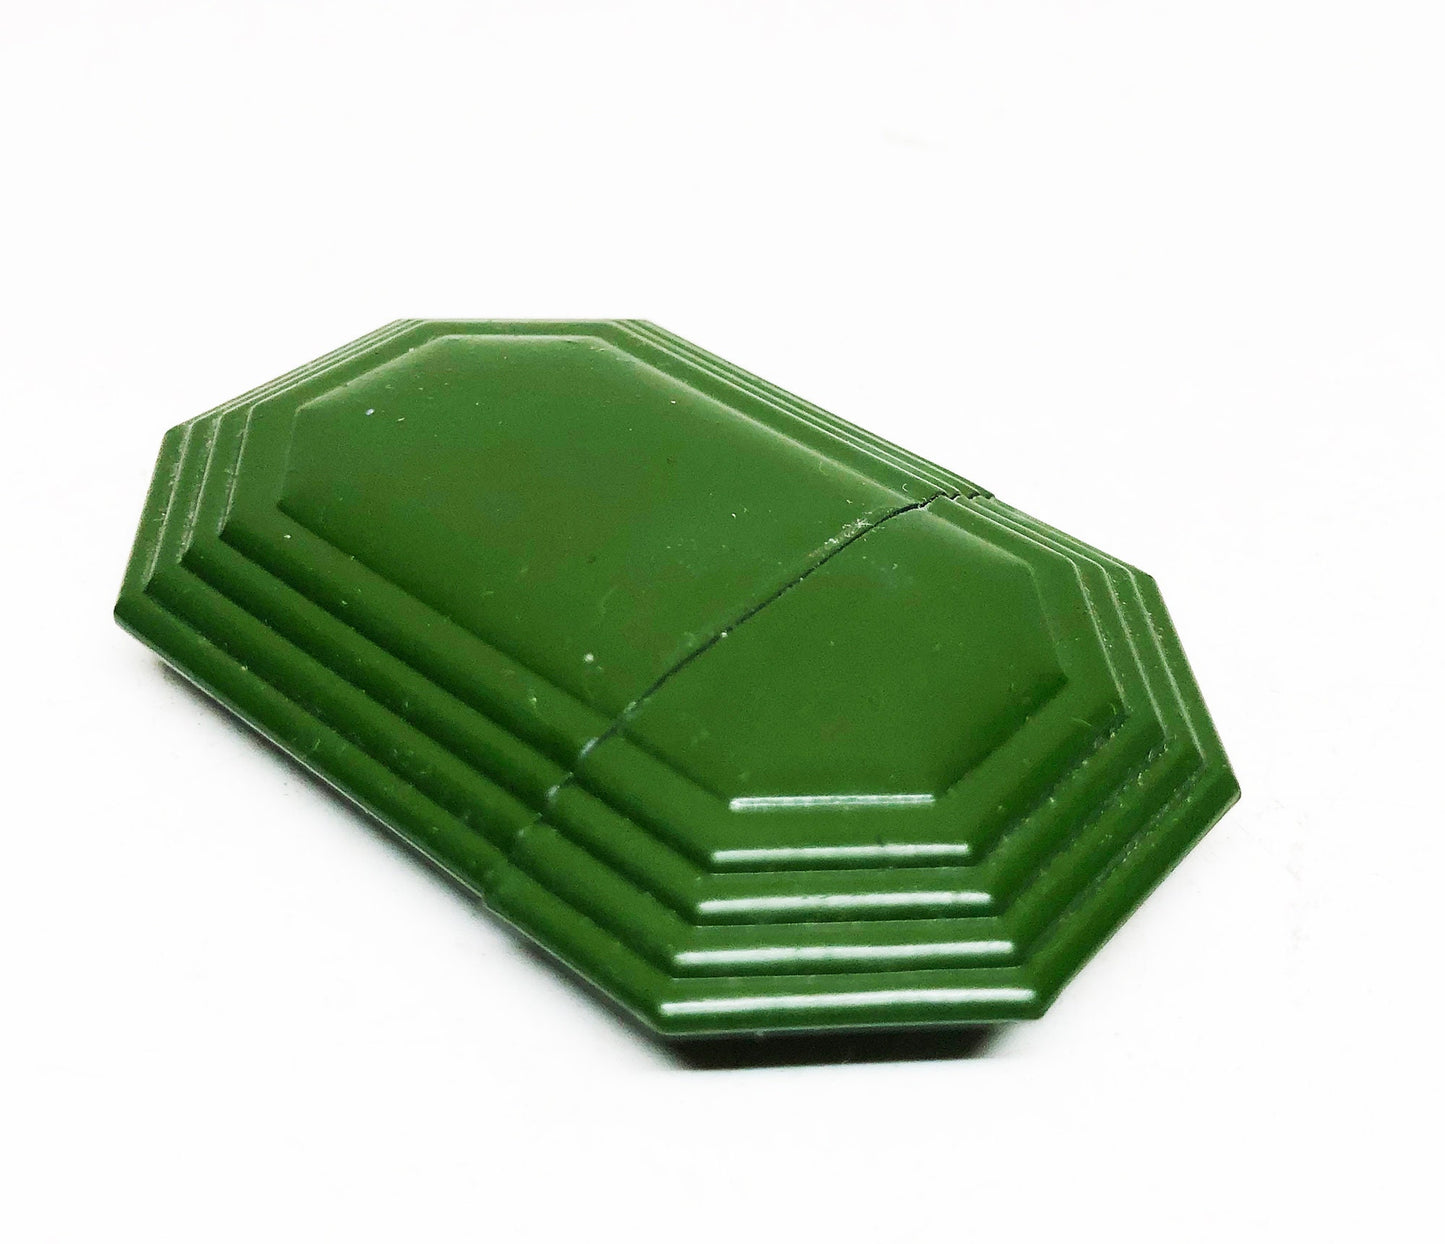 Working Eagle Green Octagonal Lighter - Vintage 1930's Trench Style Blue Steel Sleeve Lighter in Original Box - Made in USA